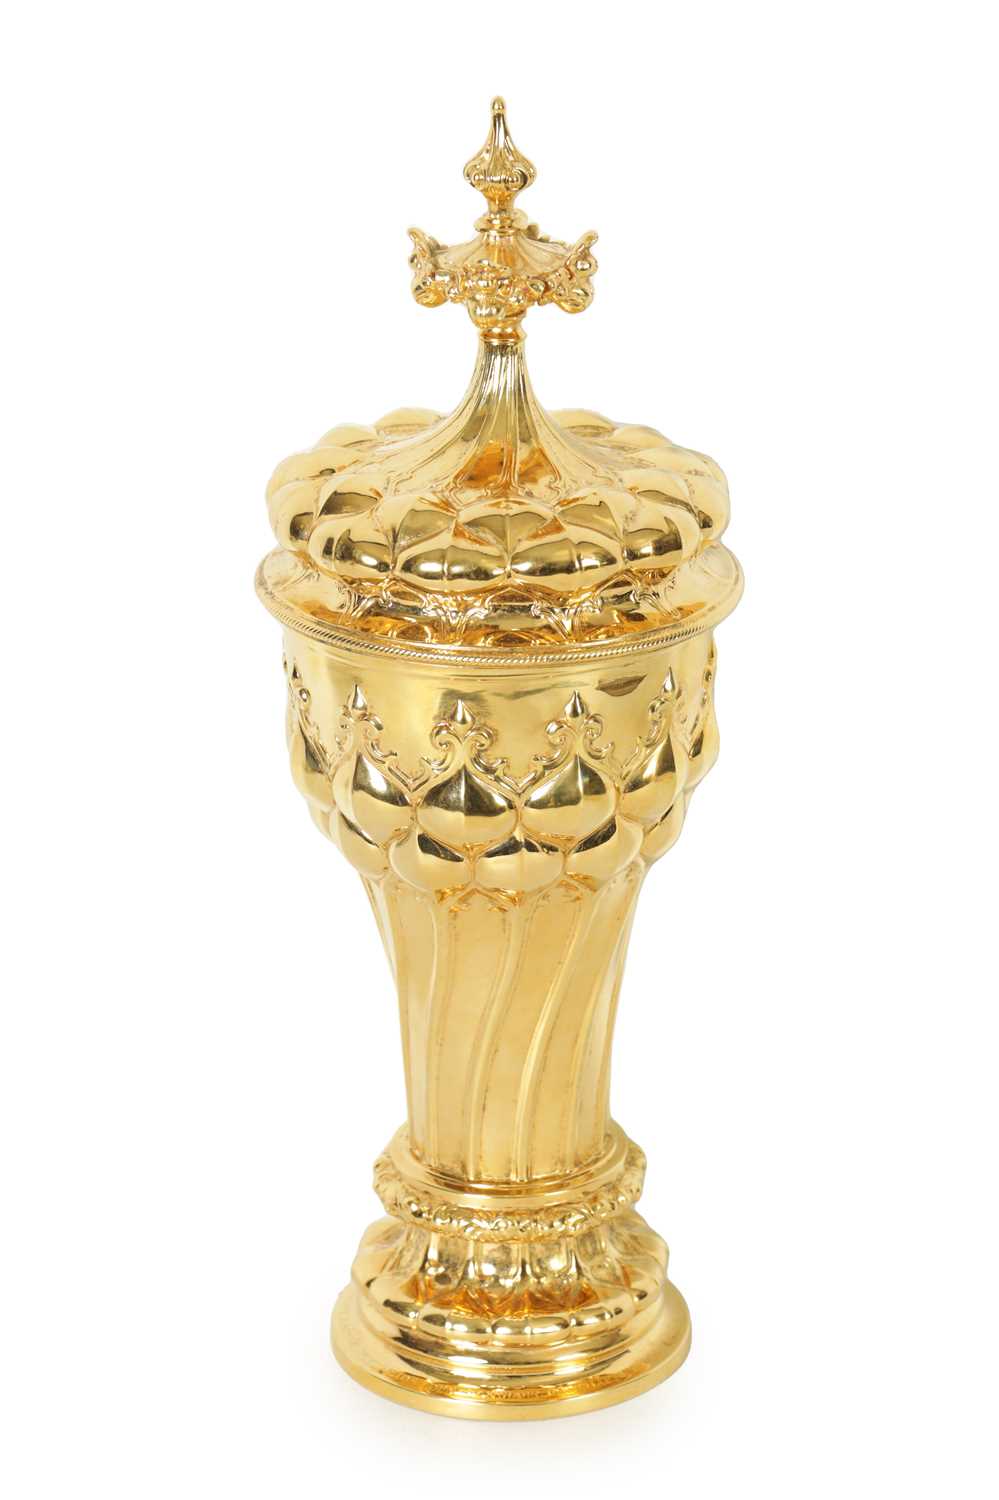 AN ART DECO GOTHIC REVIVAL CONTINENTAL SILVER GILT PRESENTATION CUP AND COVER